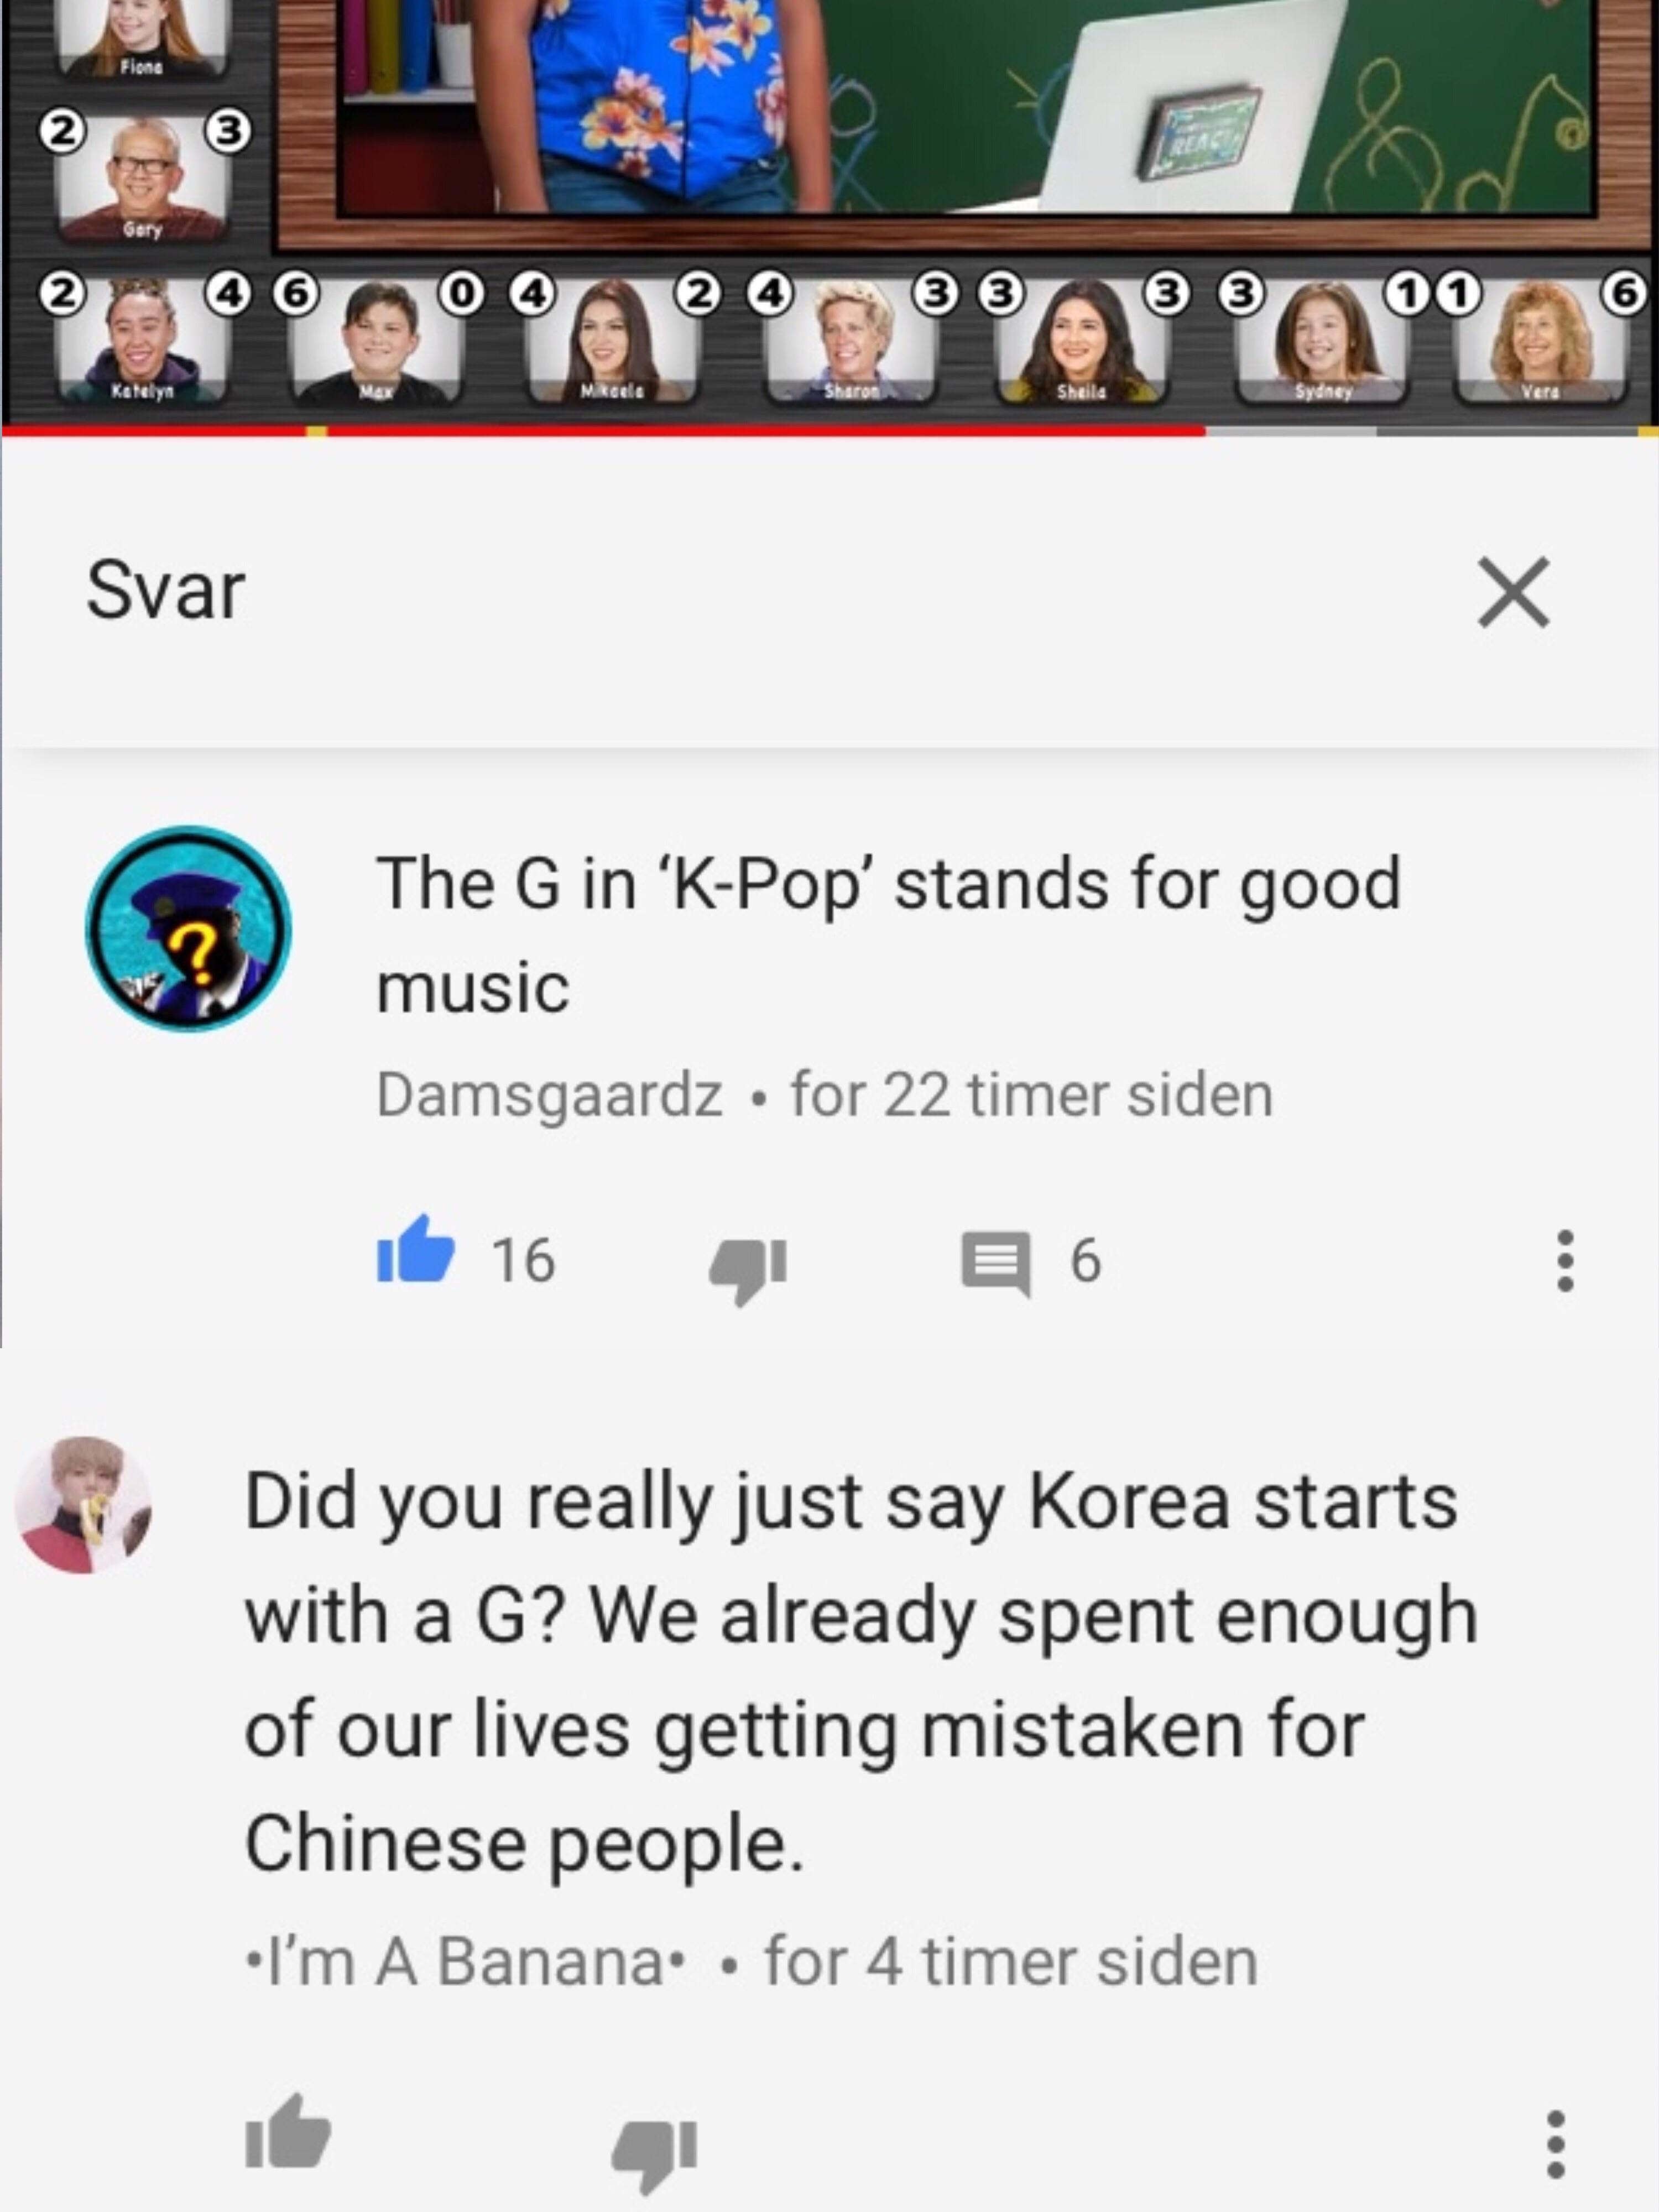 screenshot - O Ad Svar The G in 'KPop' stands for good music Damsgaardz . for 22 timer siden be 16 4 6 Did you really just say Korea starts with a G? We already spent enough of our lives getting mistaken for Chinese people. I'm A Banana.. for 4 timer side